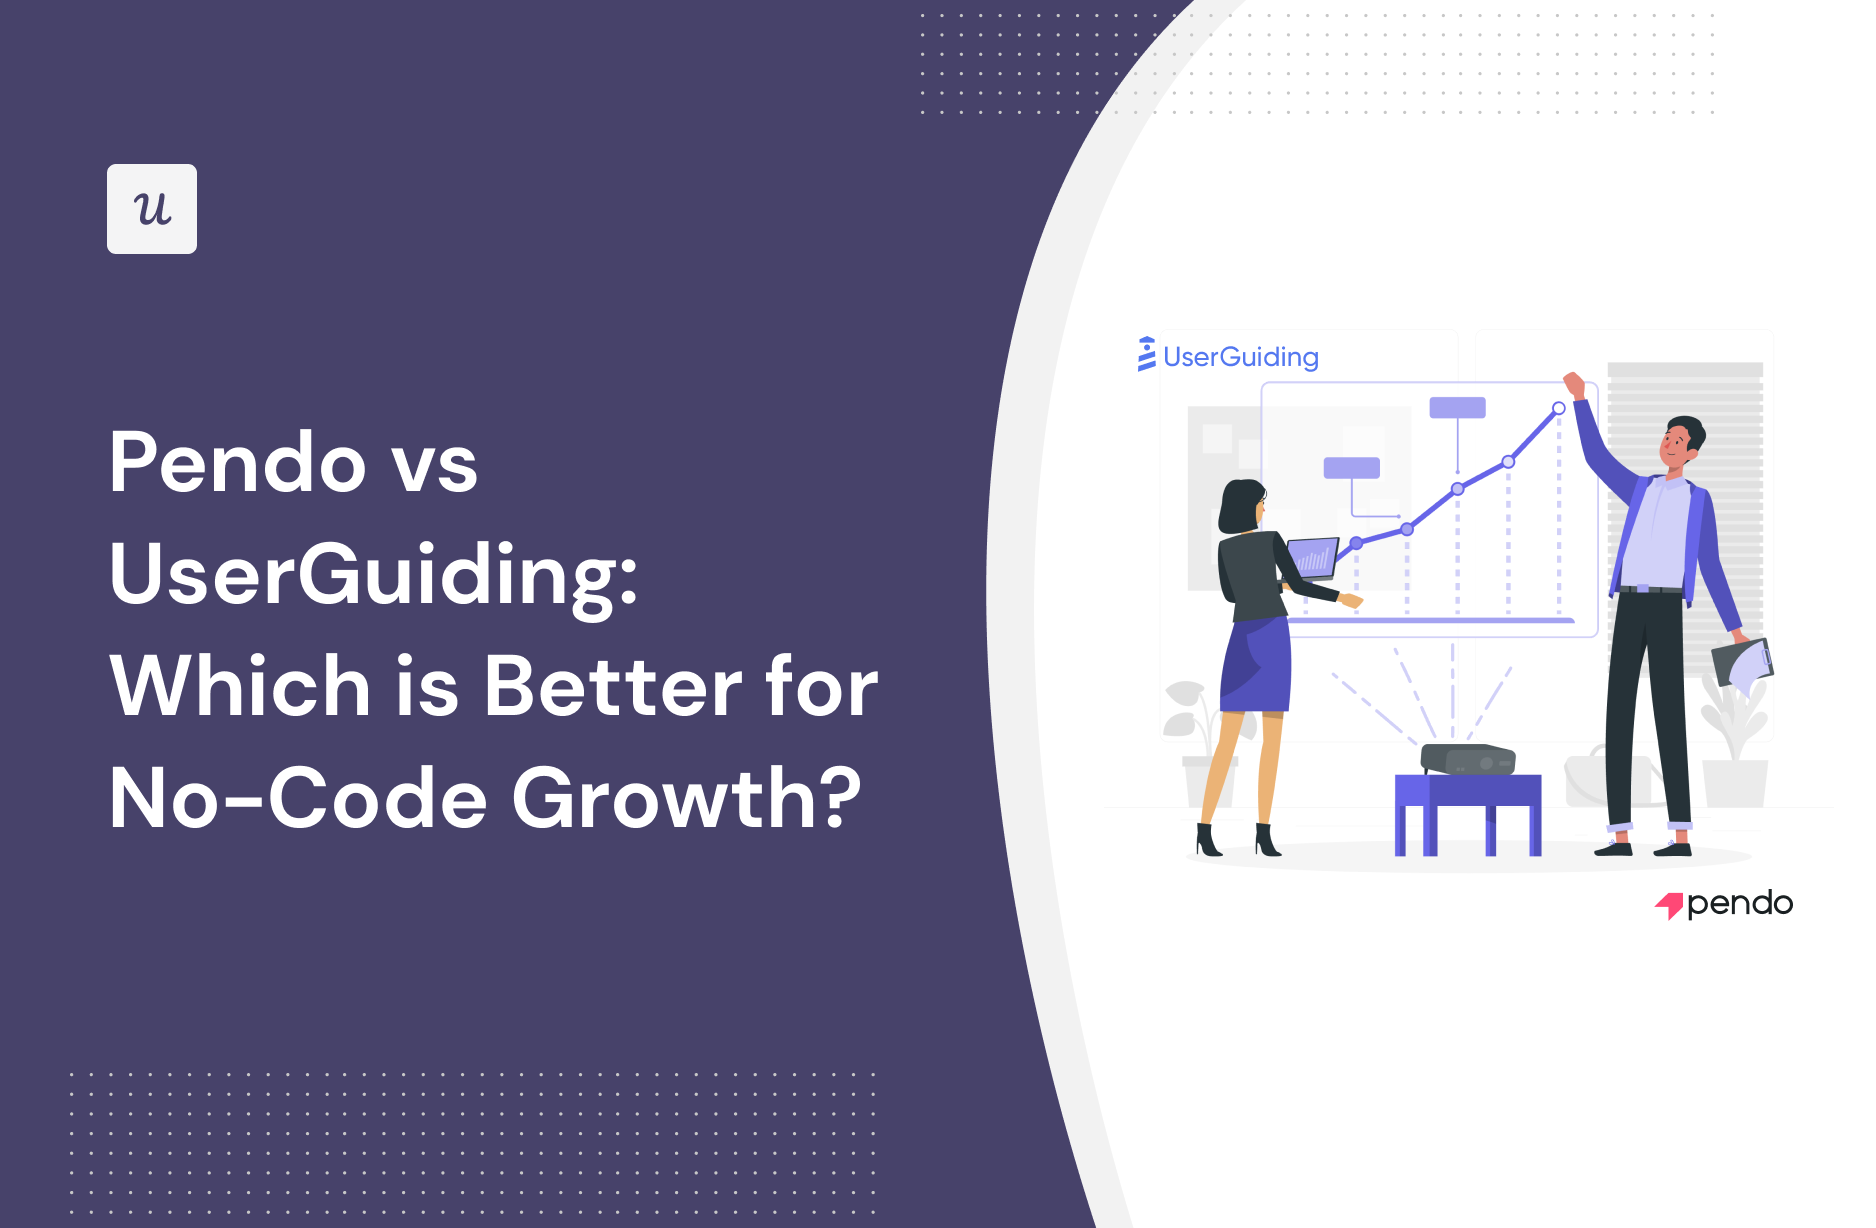 Pendo vs UserGuiding: Which is Better for No-Code Growth?